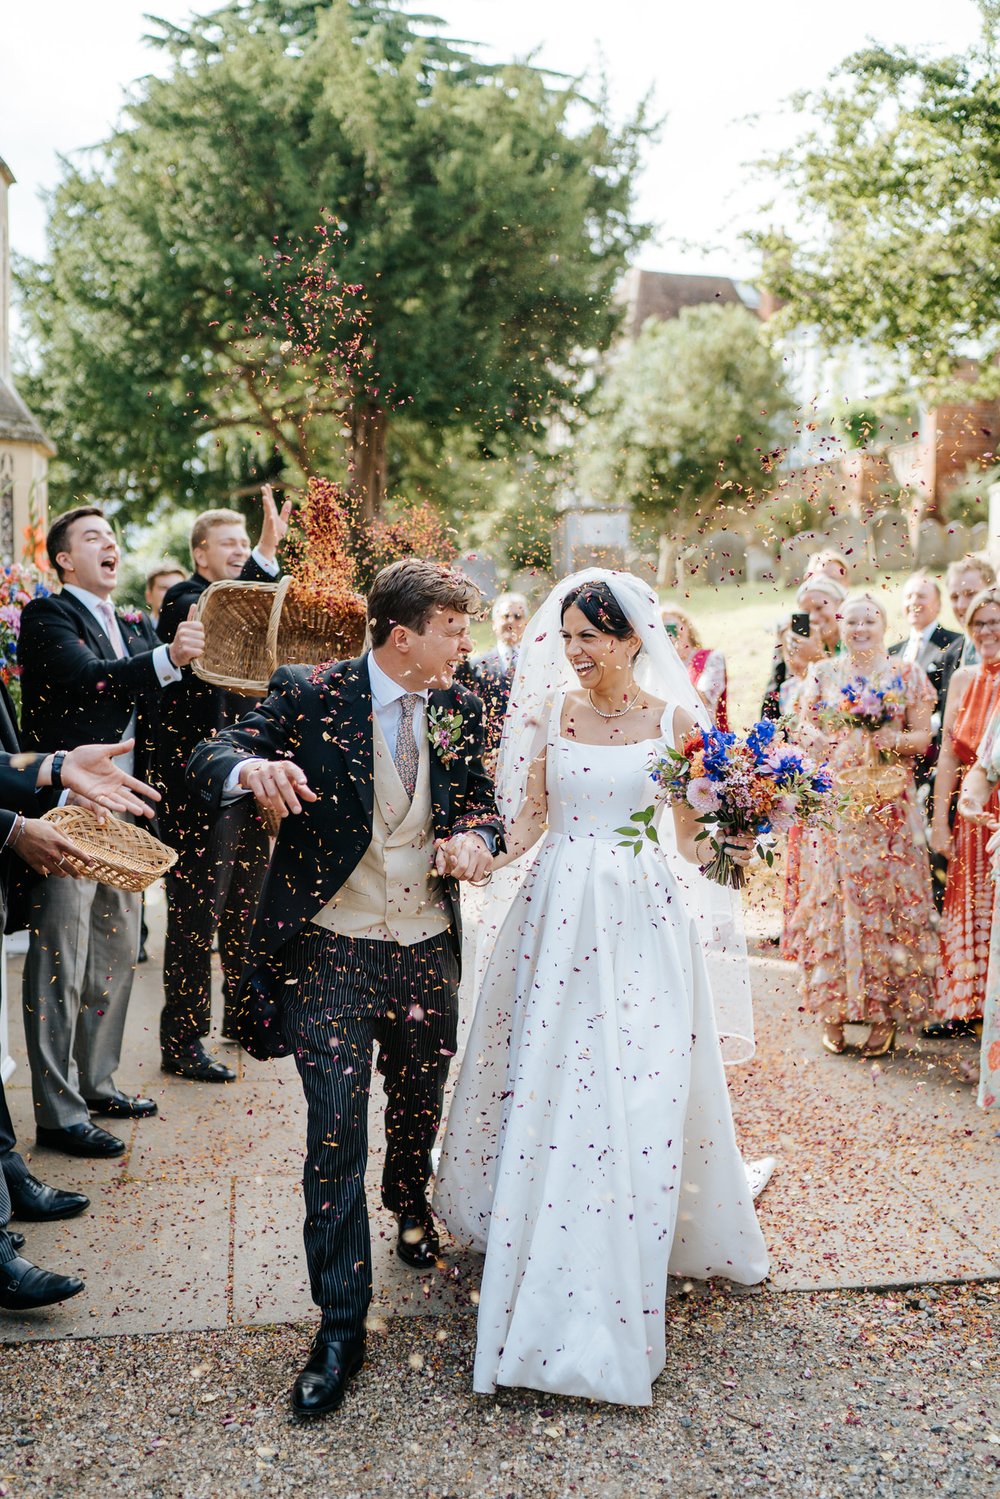 Bride and groom, dressed impeccably, exit church in Woodbridge through tunnel of confetti